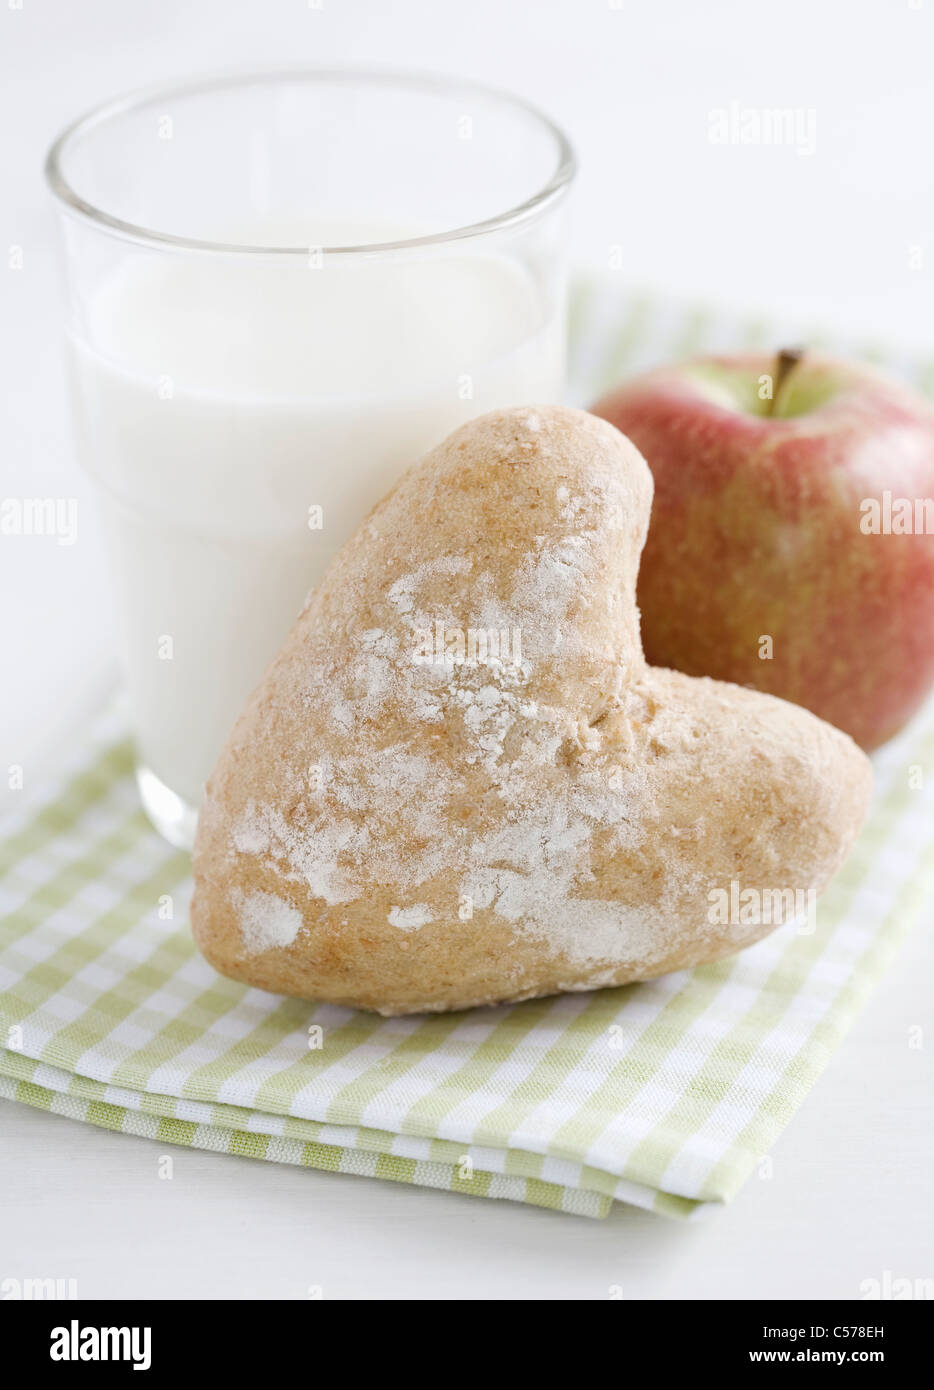 Bread roll and apple with milk Stock Photo